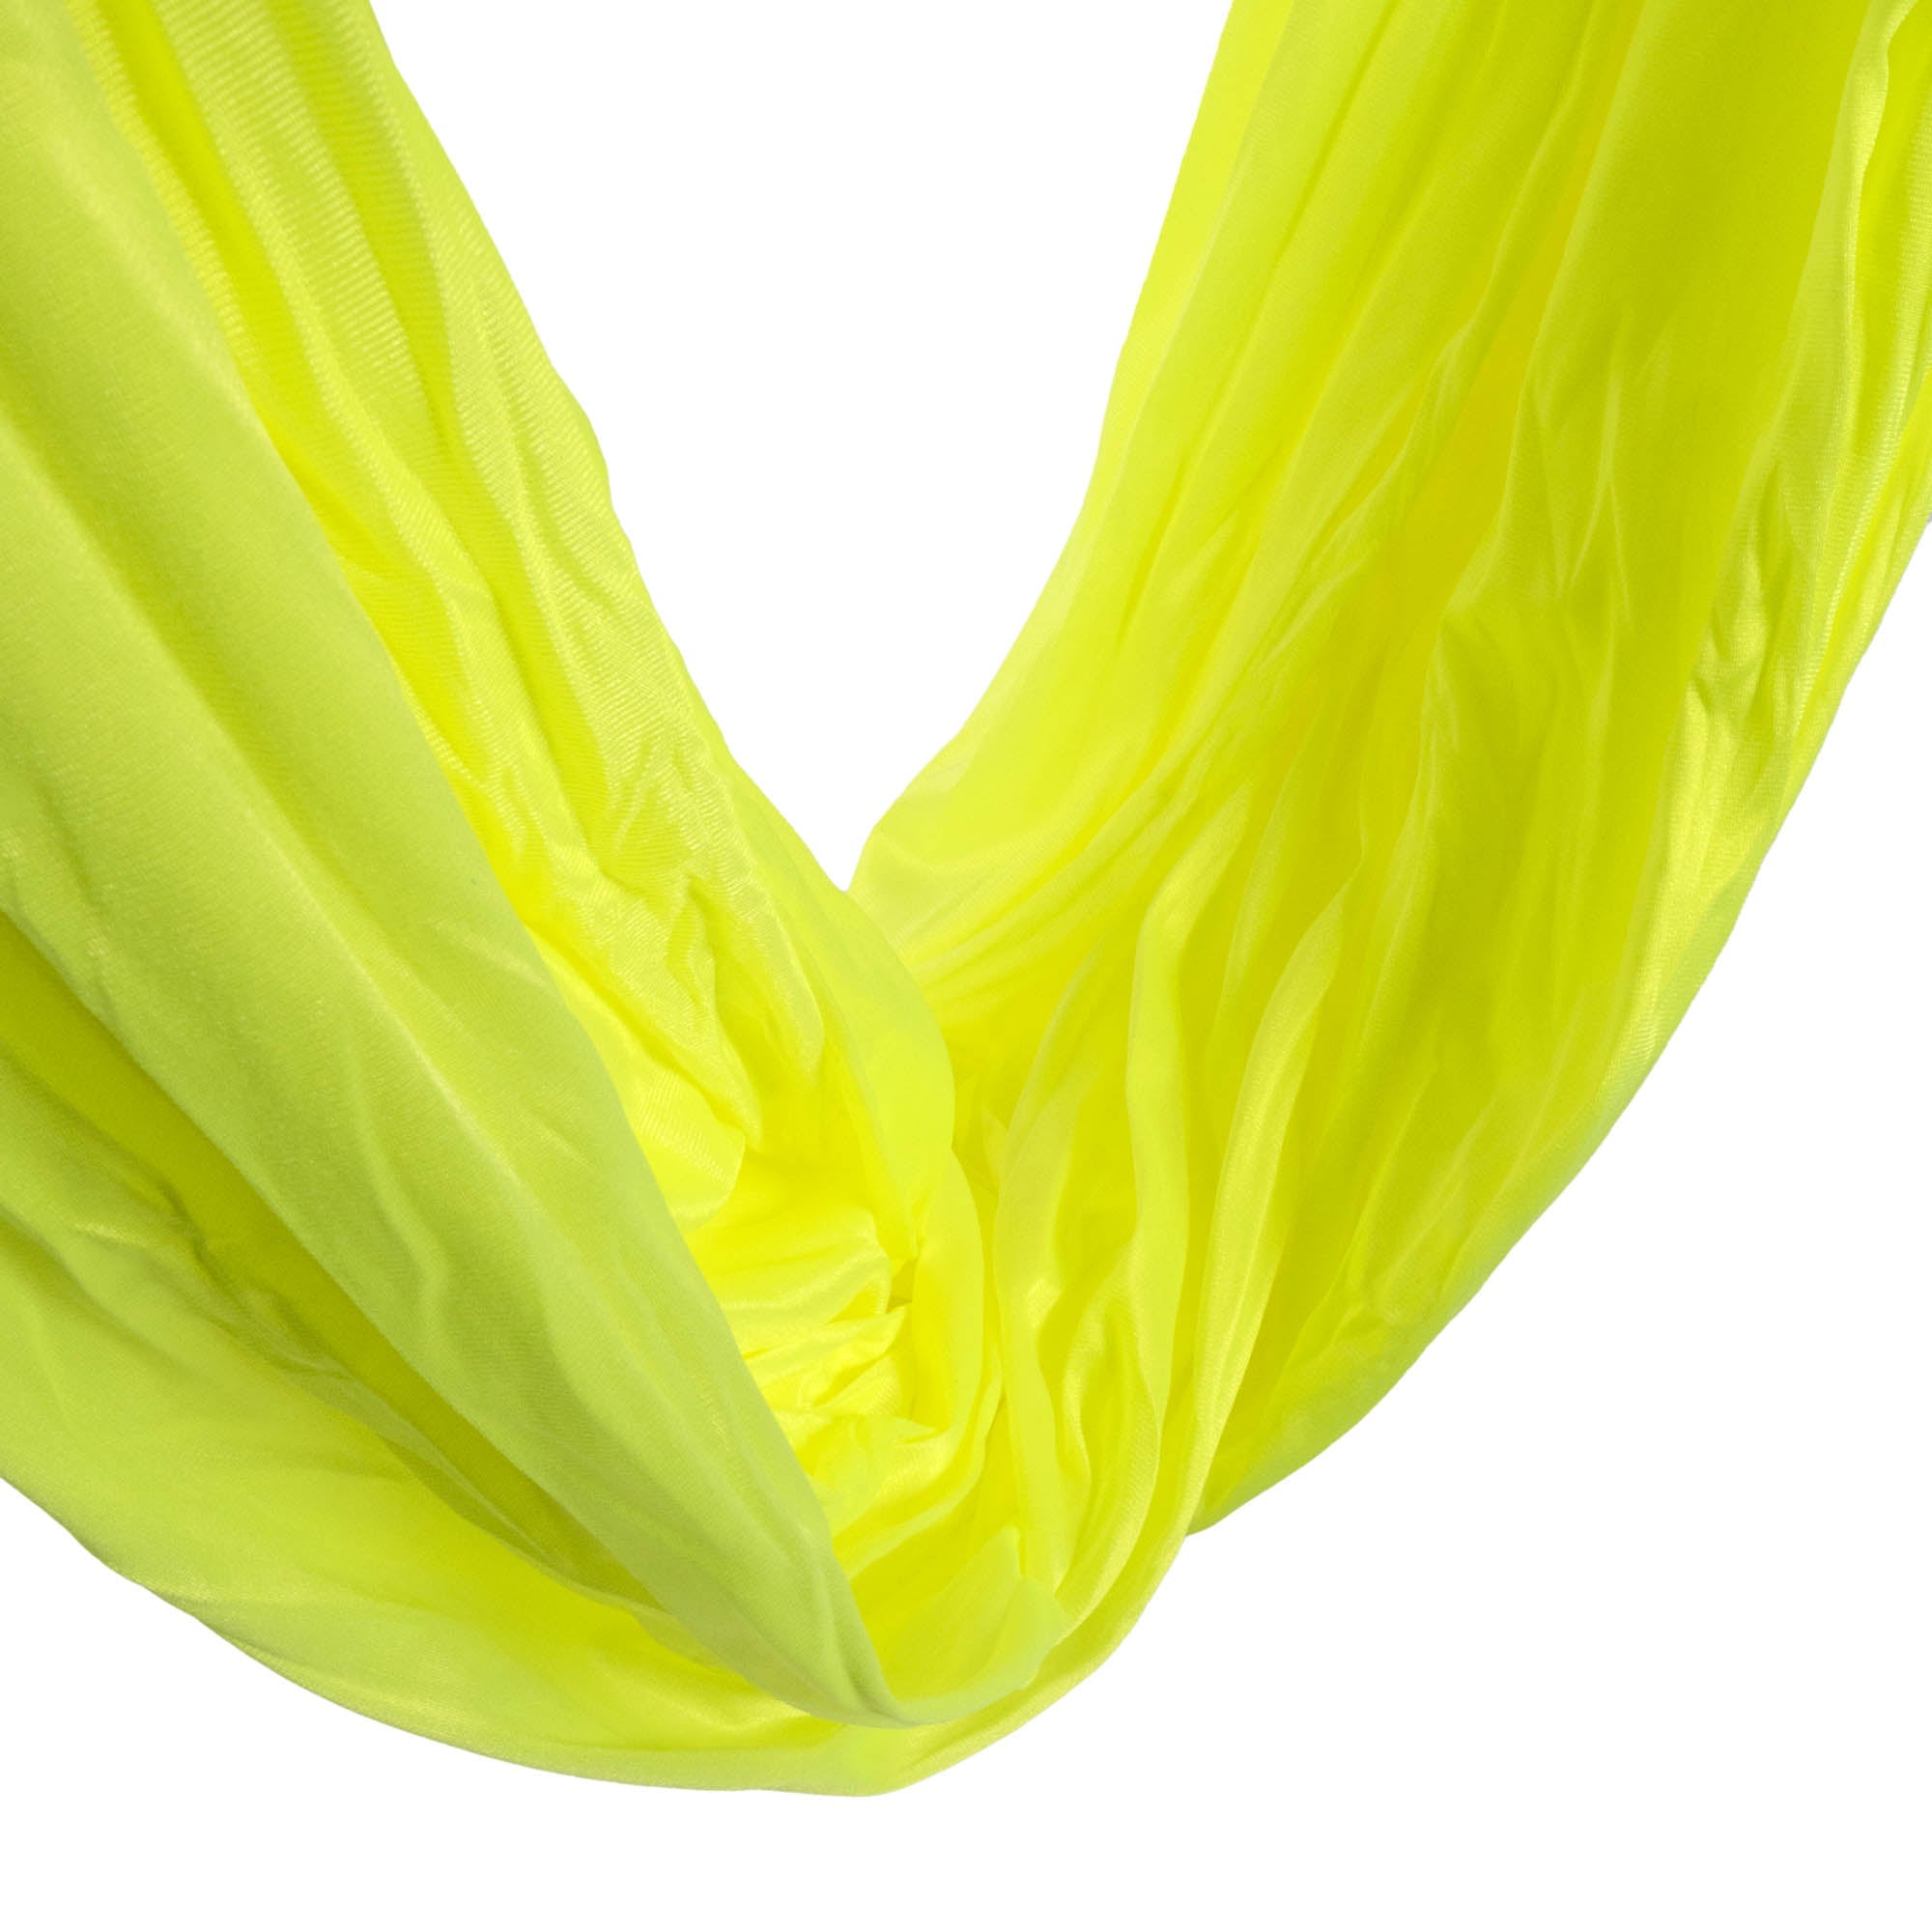 Prodigy 6m aerial yoga hammock in neon yellow close up 